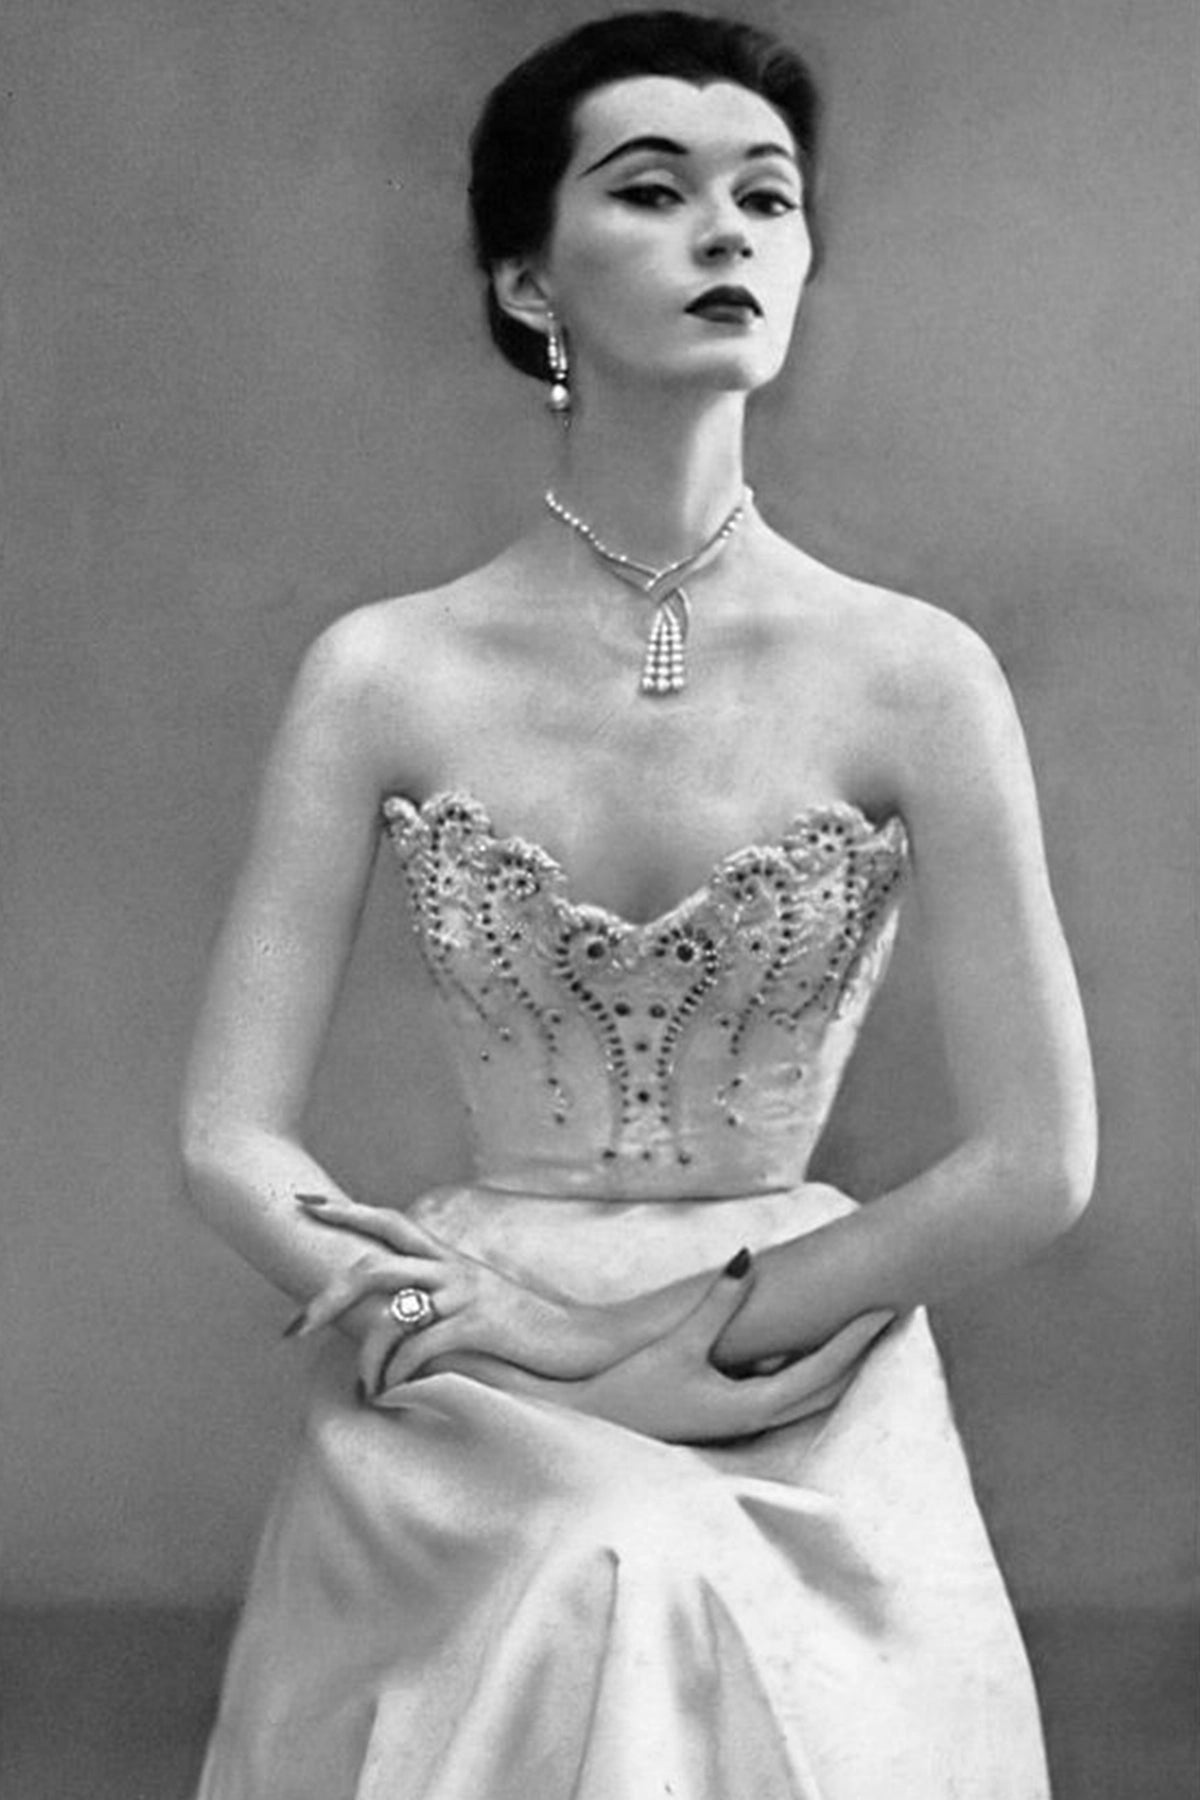 Dovima in strapless white satin dress with a tight bodice embroidered with rubies and pearls by Balenciaga, photo by Richard Avedon, Harper's Bazaar, September 1950